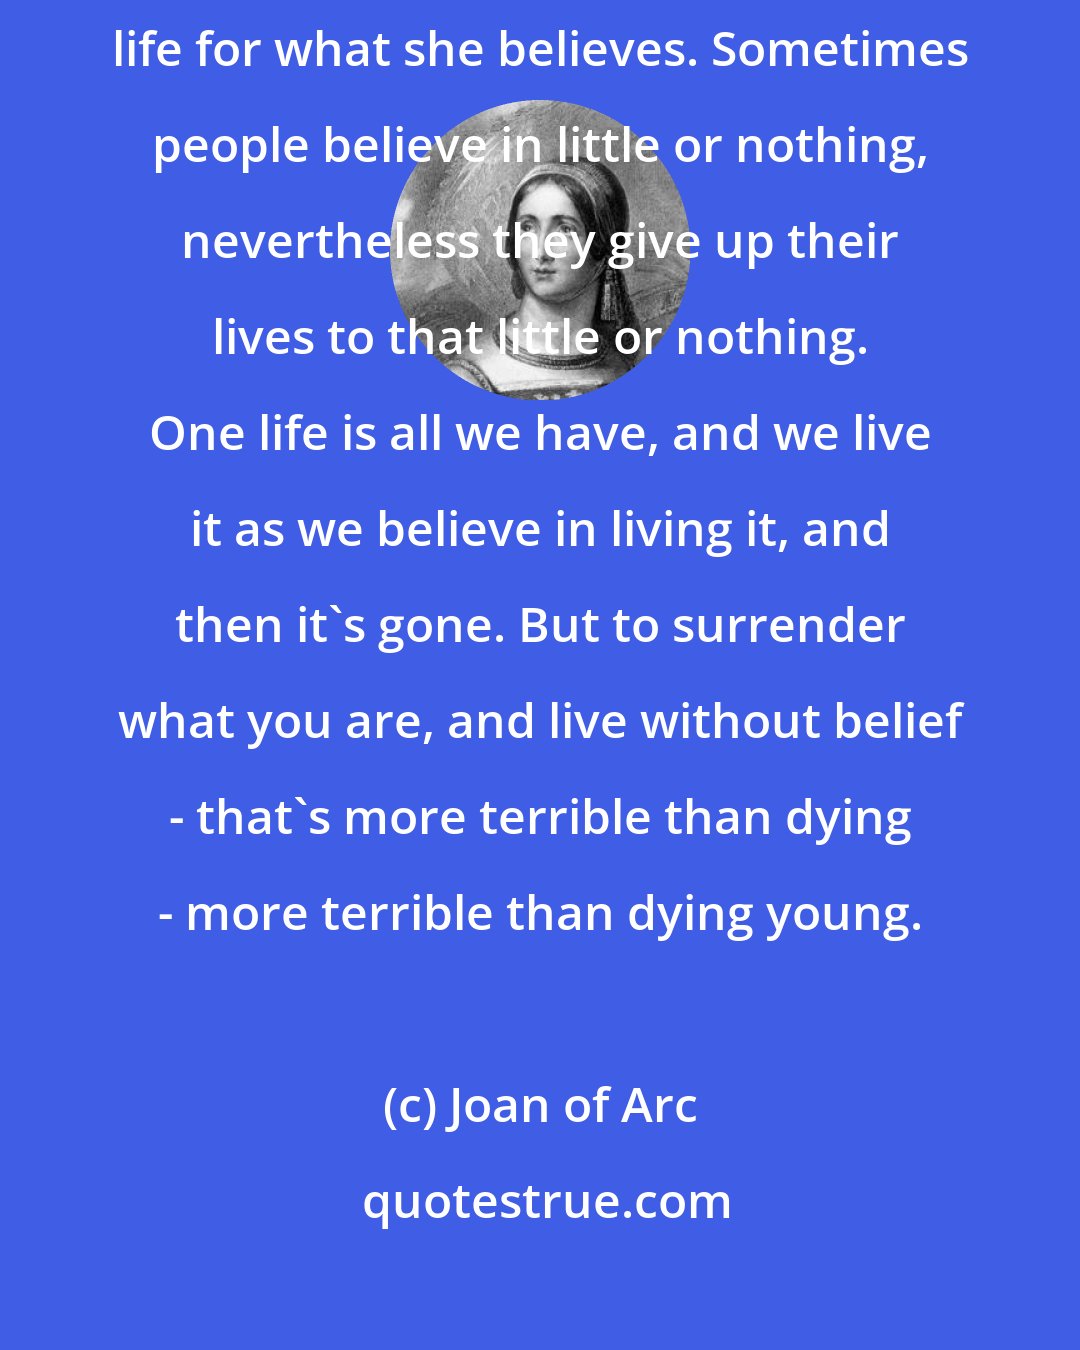 Joan of Arc: Every man gives his life for what he believes. Every woman gives her life for what she believes. Sometimes people believe in little or nothing, nevertheless they give up their lives to that little or nothing. One life is all we have, and we live it as we believe in living it, and then it's gone. But to surrender what you are, and live without belief - that's more terrible than dying - more terrible than dying young.